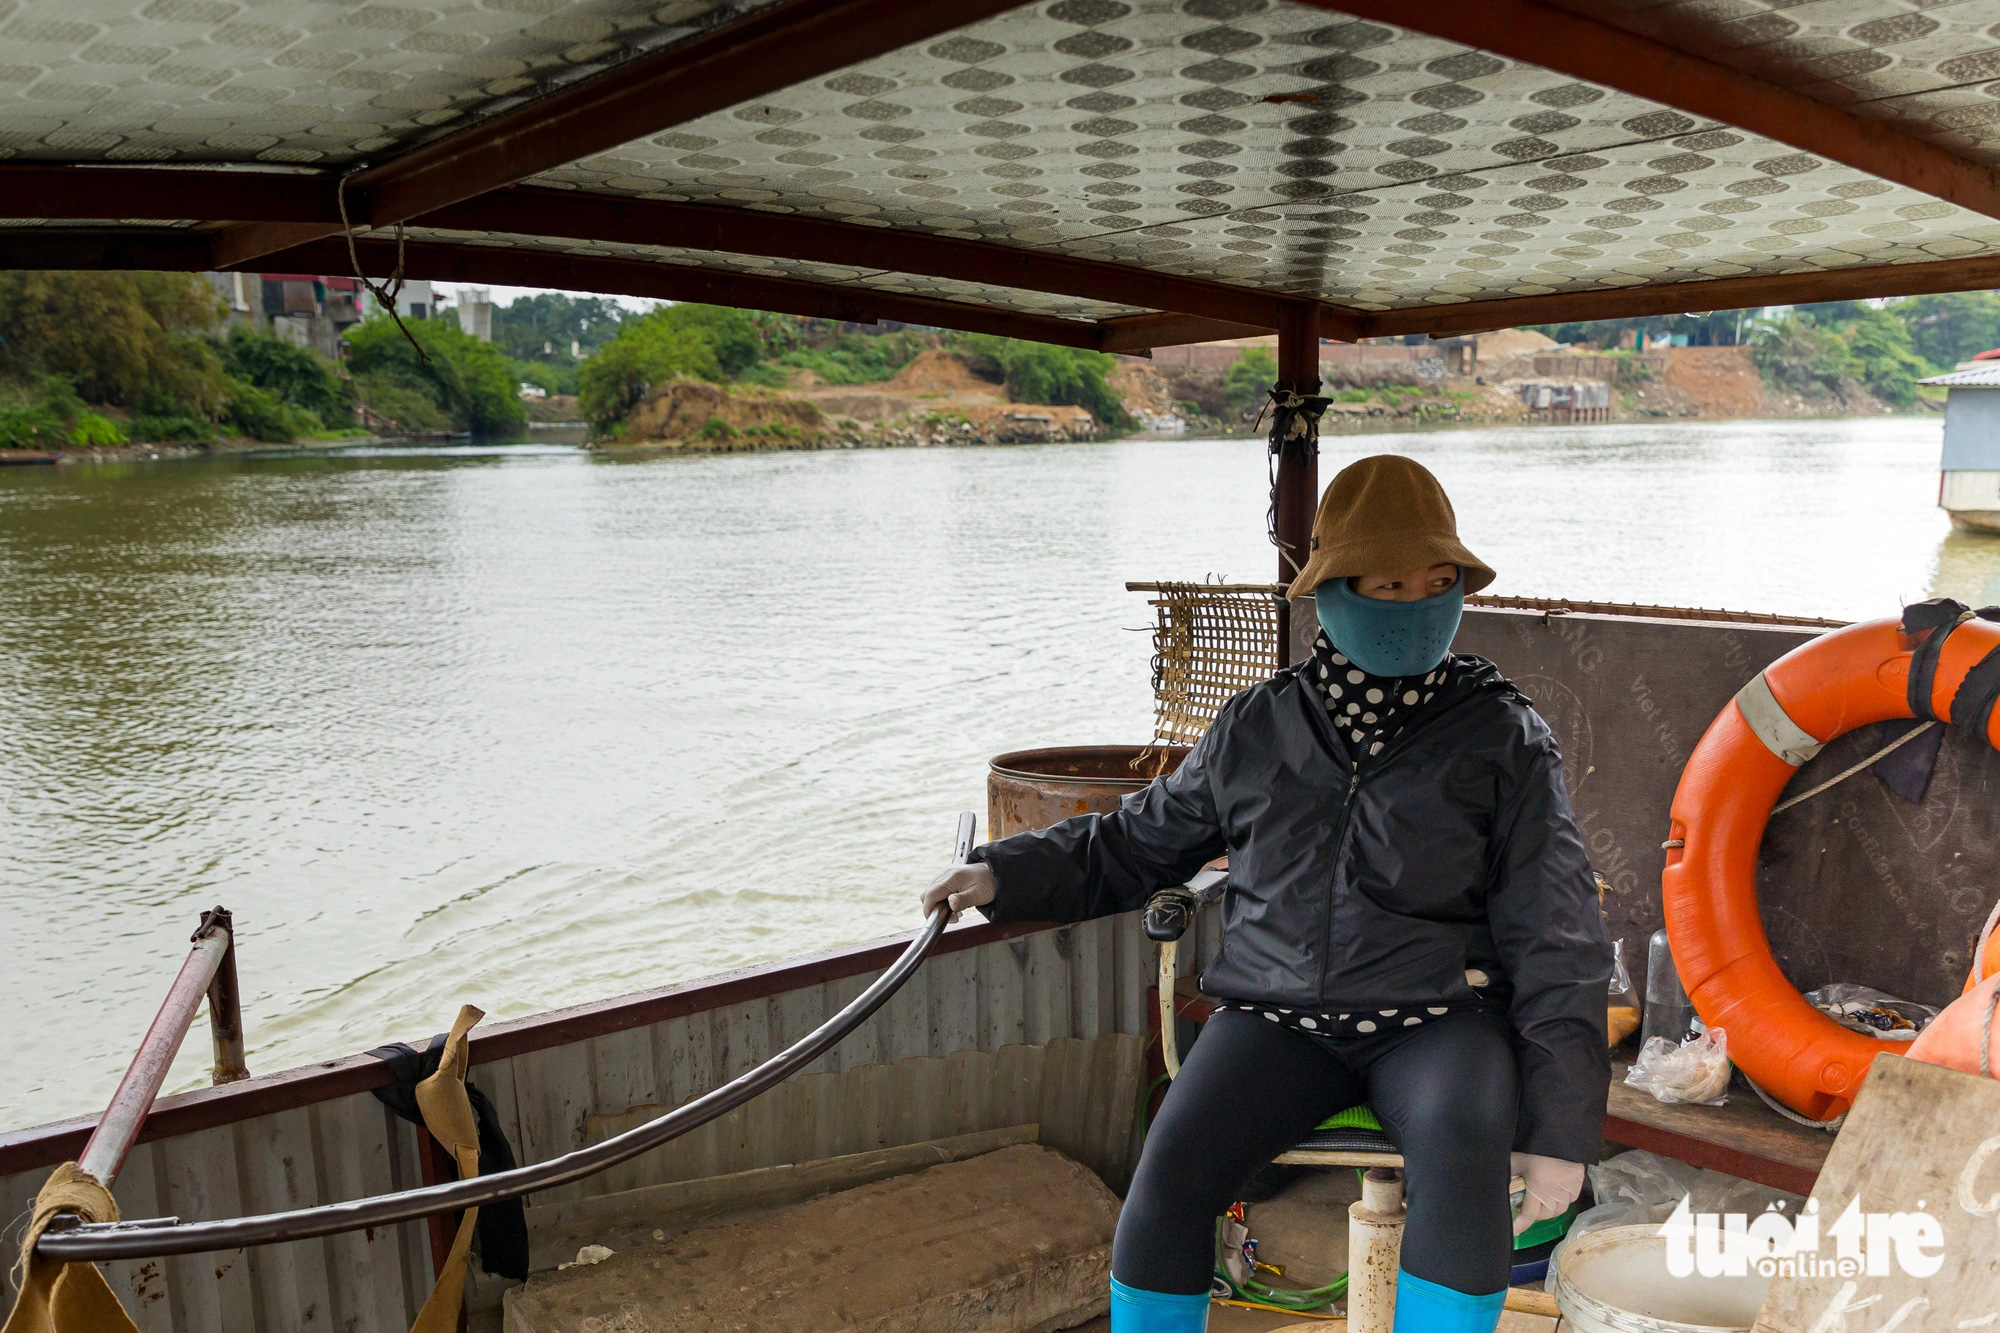 Hien, a boatwoman shuttling passengers between Bac Ninh City in Bac Ninh Province and Viet Yen Town in Bac Giang Province, northern Vietnam describe how the wastewater released into the Cau River emits a foul odor, sometimes causing discomfort to the nose. Photo: D.Khang / Tuoi Tre